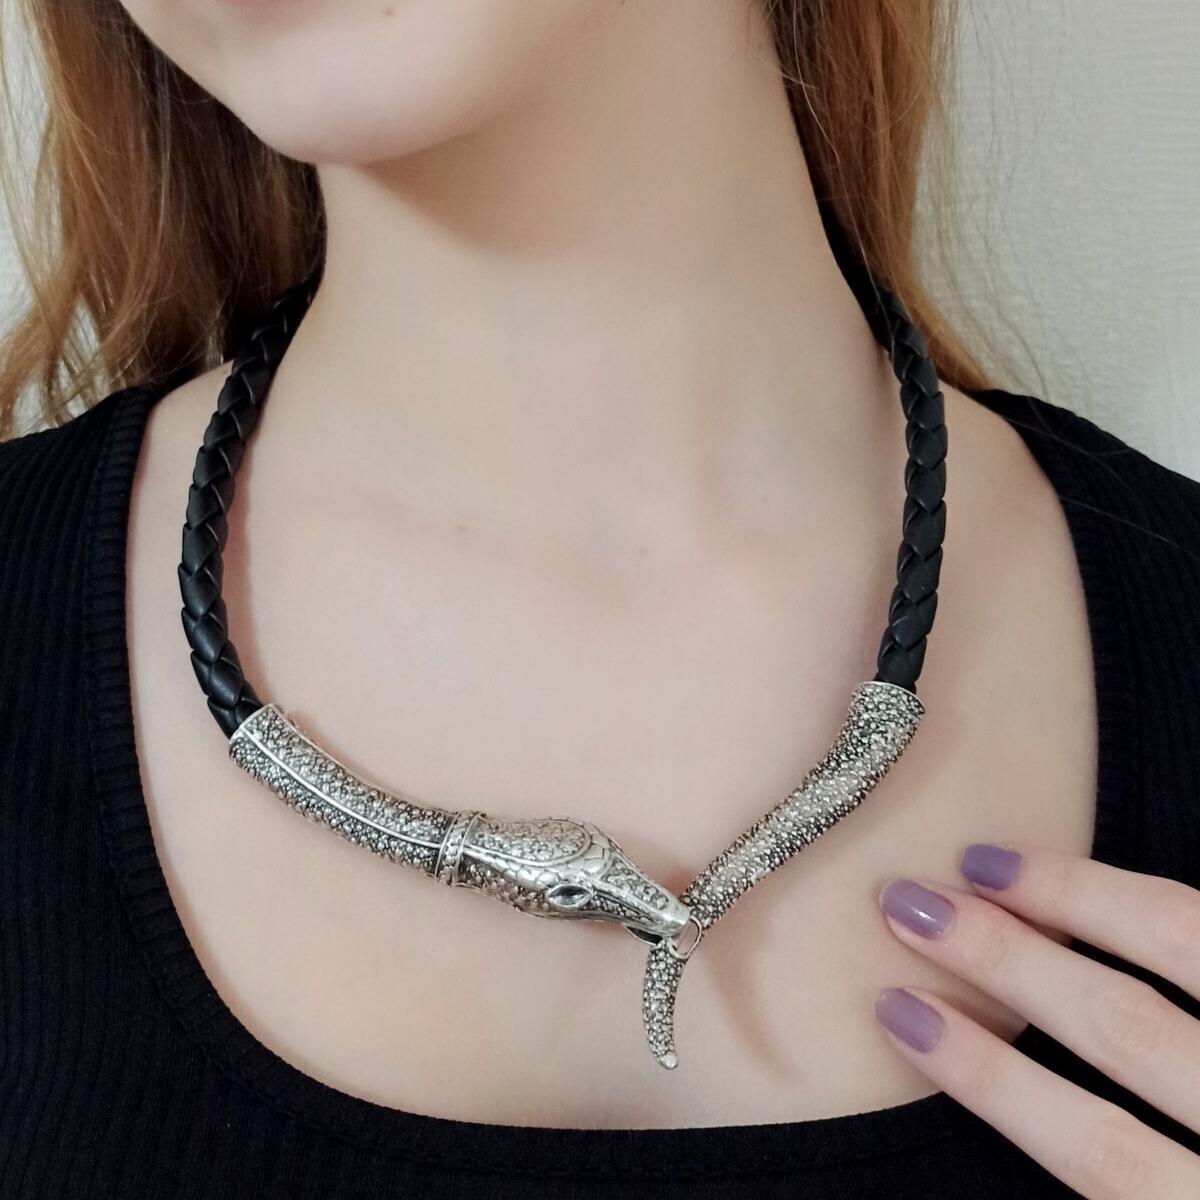 Antique Necklace Jewellery • Snake Necklace Silver • Gift For Her - Trending Silver Gifts